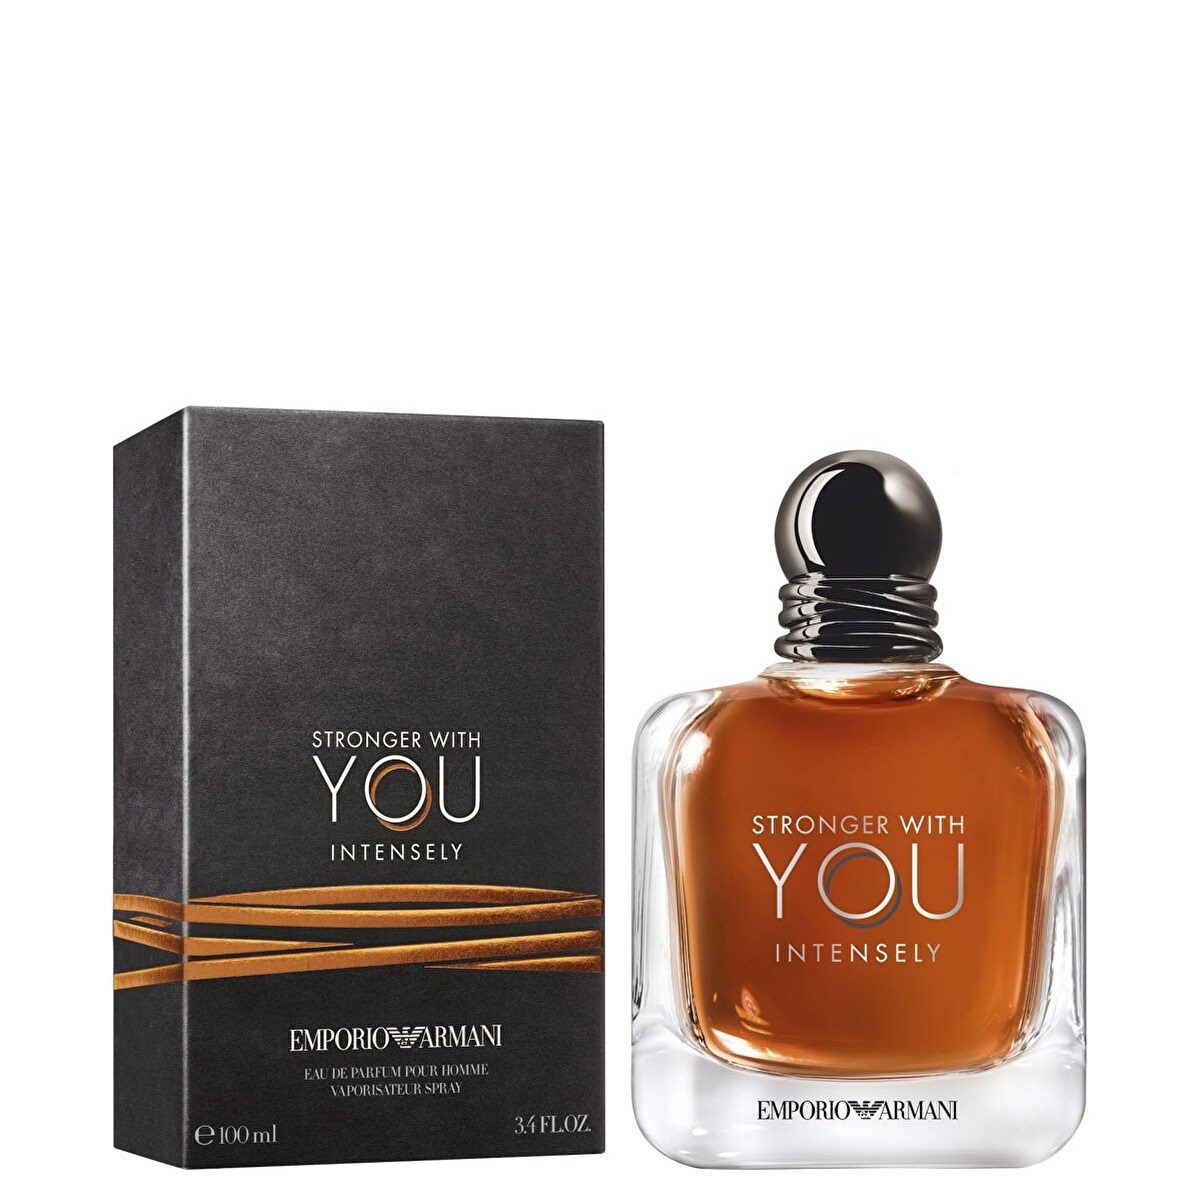 STRONGER WITH YOU INTESELY EDP 6